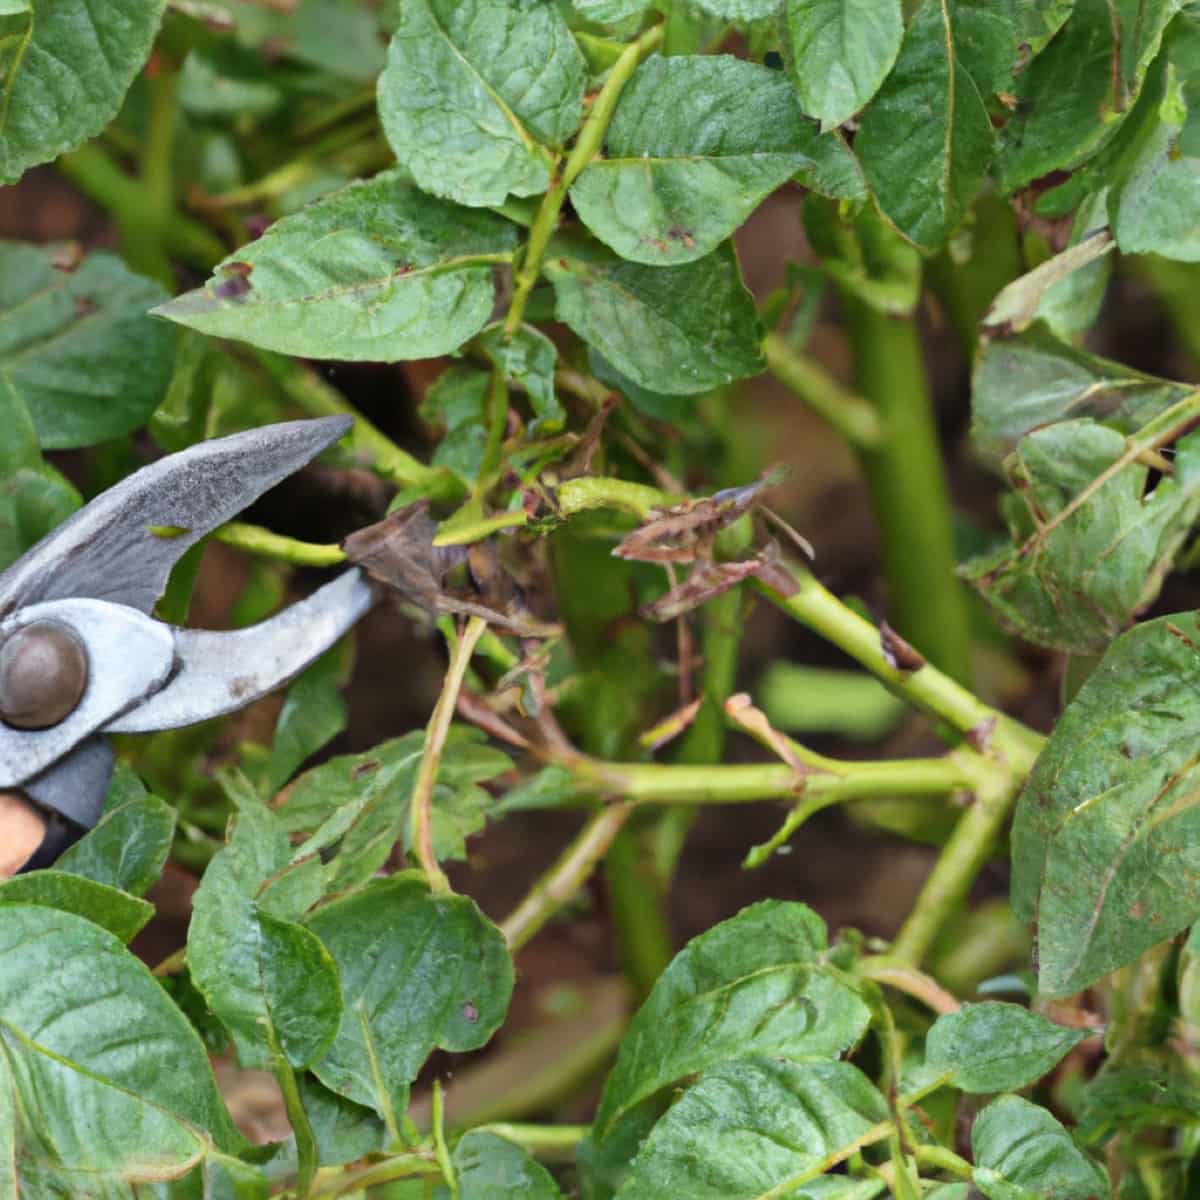 Pruning and Staking Techniques for Indeterminate Potato Varieties